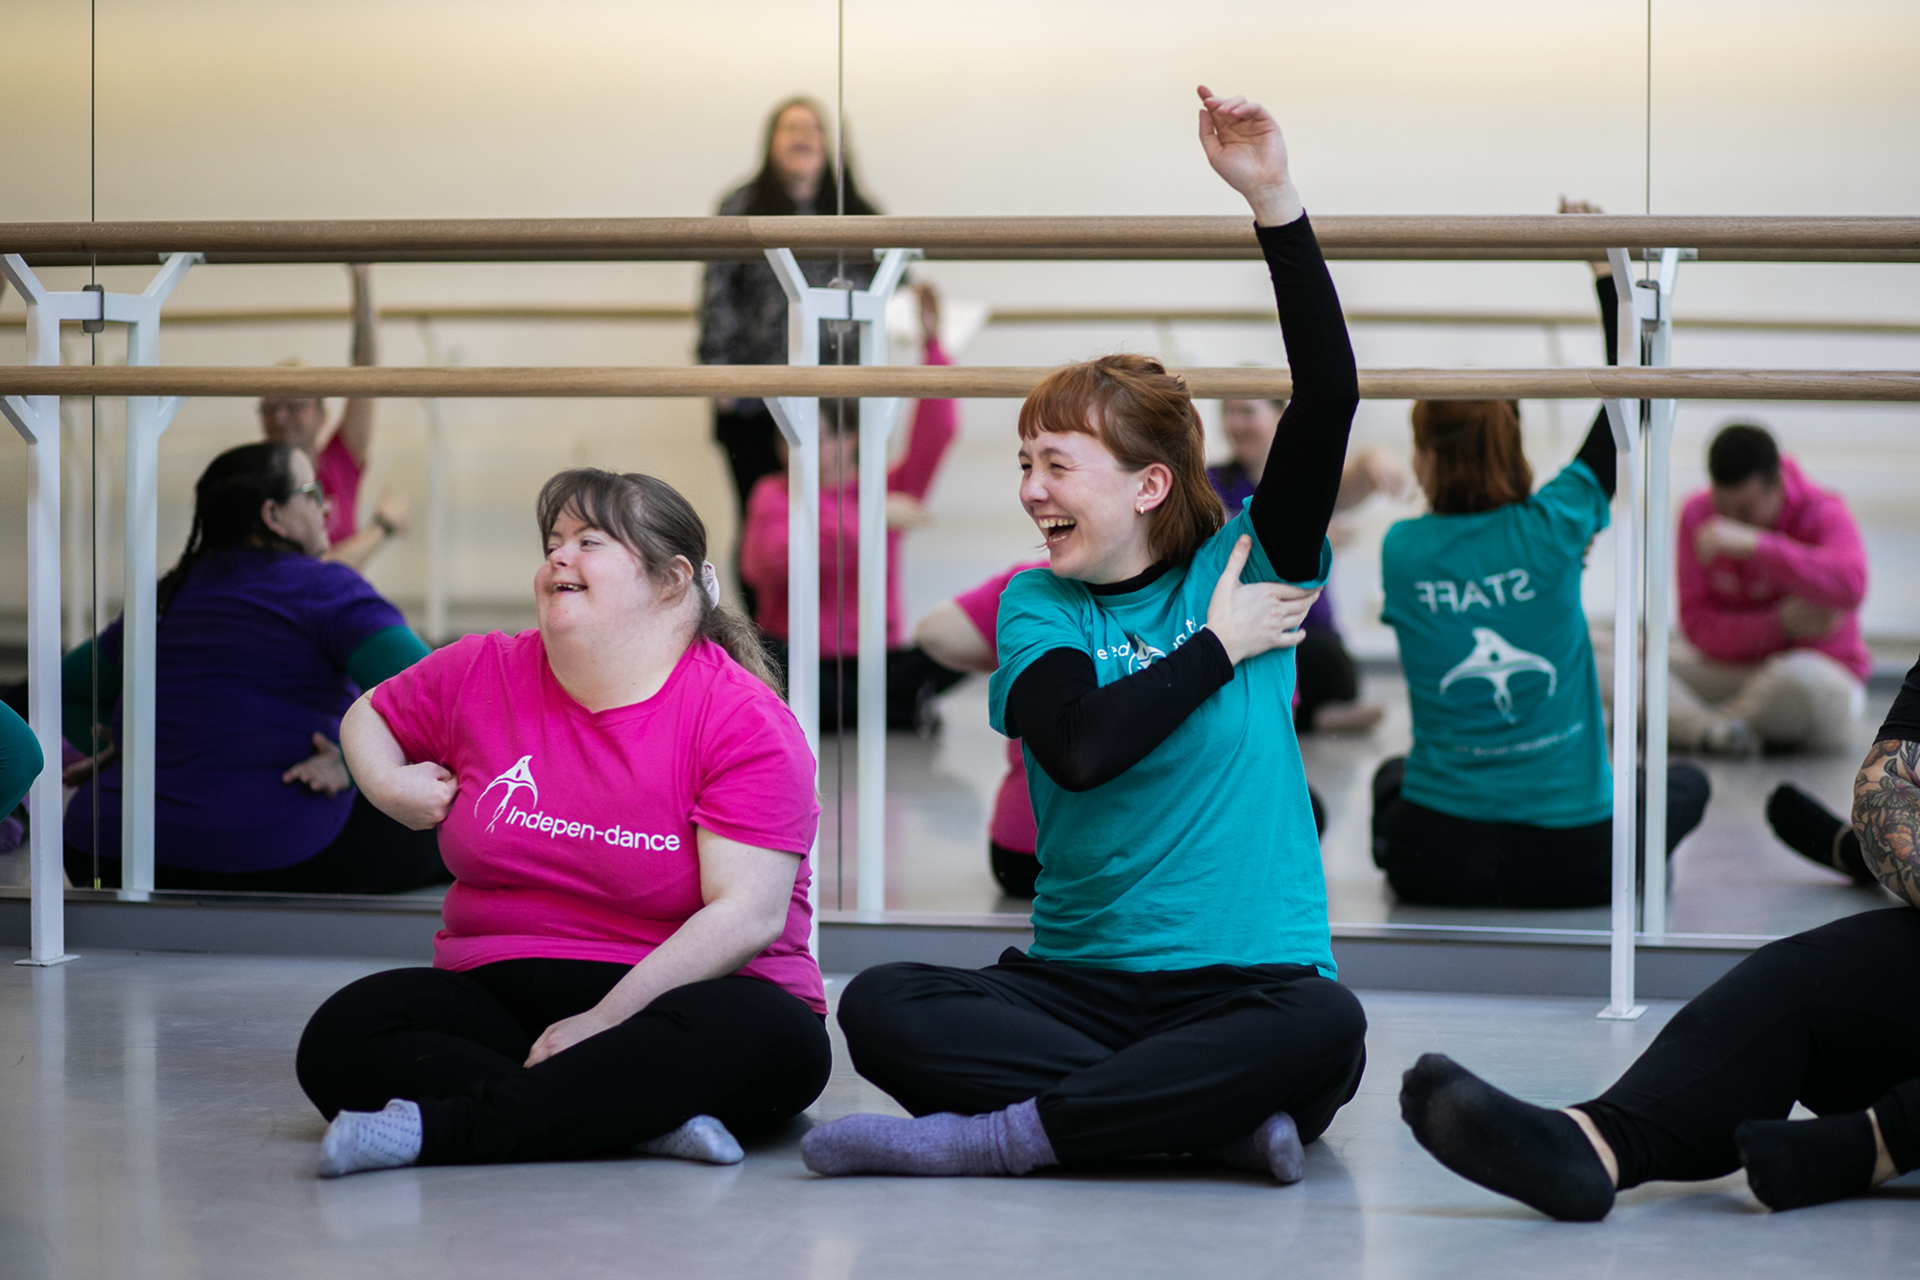 Two white females smiling cross legged, on the left, a disabled dancer in a pink t-shirt, on the right, the group leader raising her arm wearing a teal t-shirt